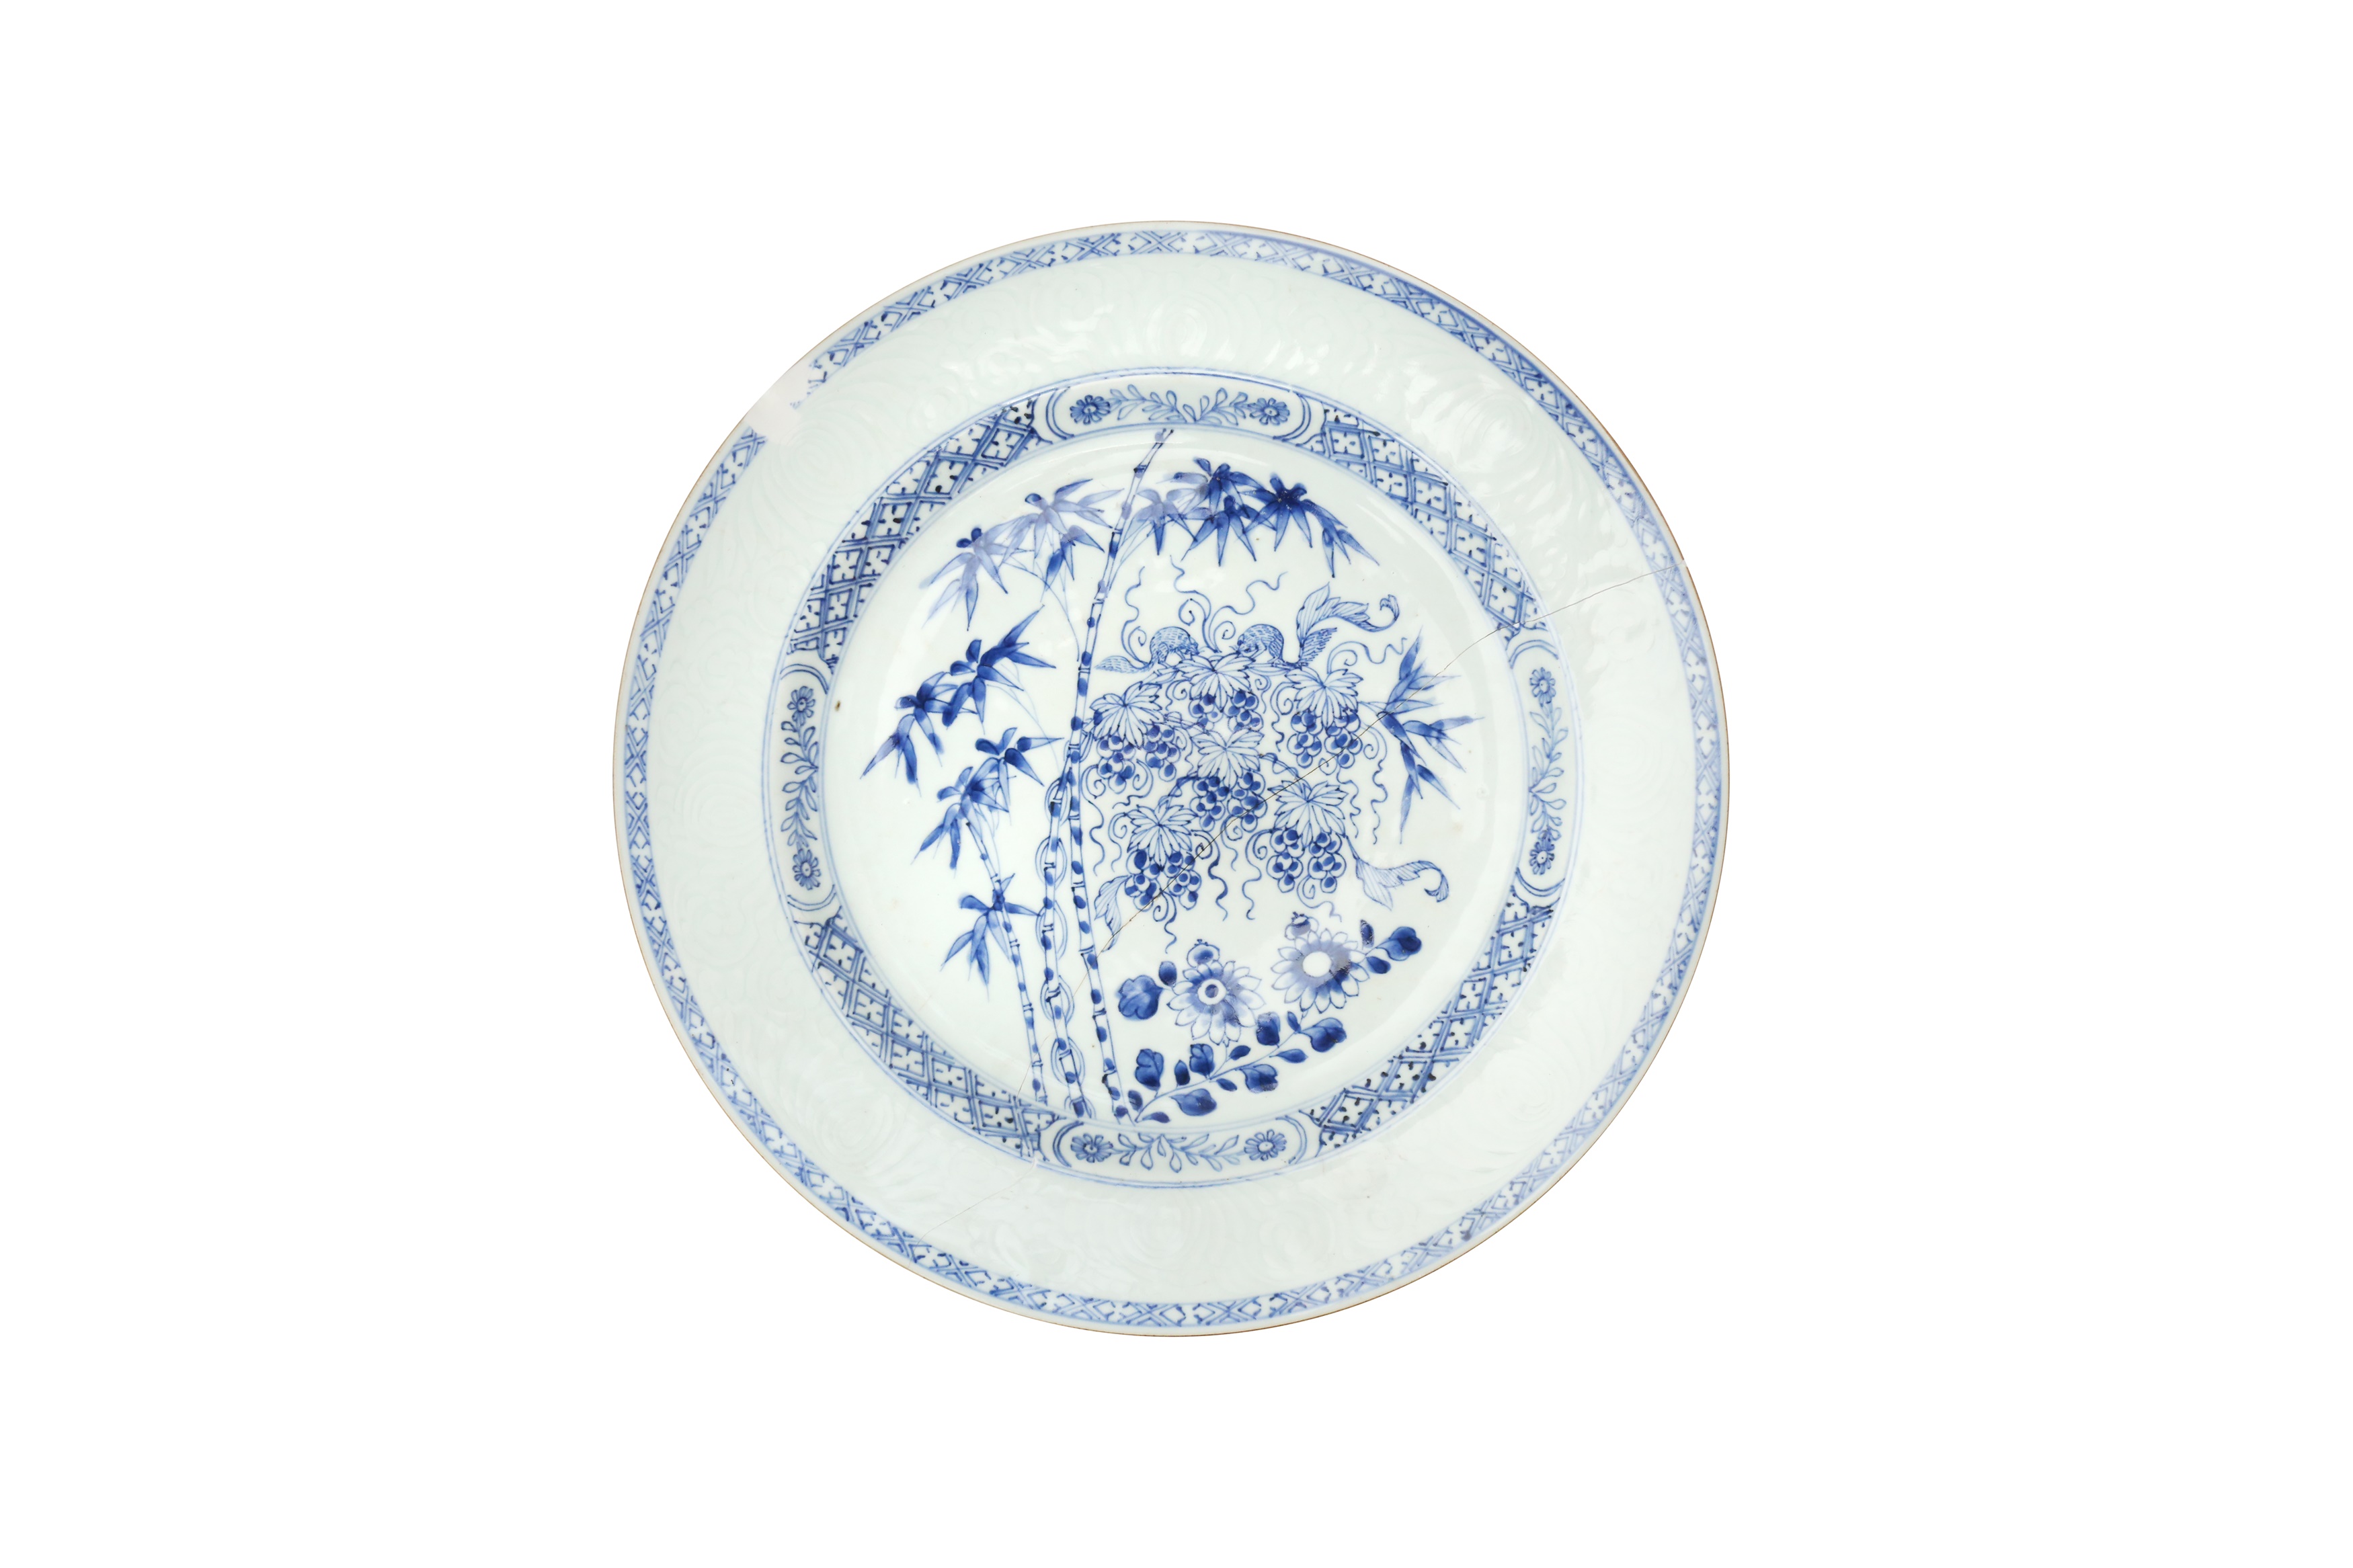 TWO LARGE CHINESE BLUE AND WHITE DISHES 清十八世紀 青花葡萄花竹紋大盤兩件 - Image 2 of 3